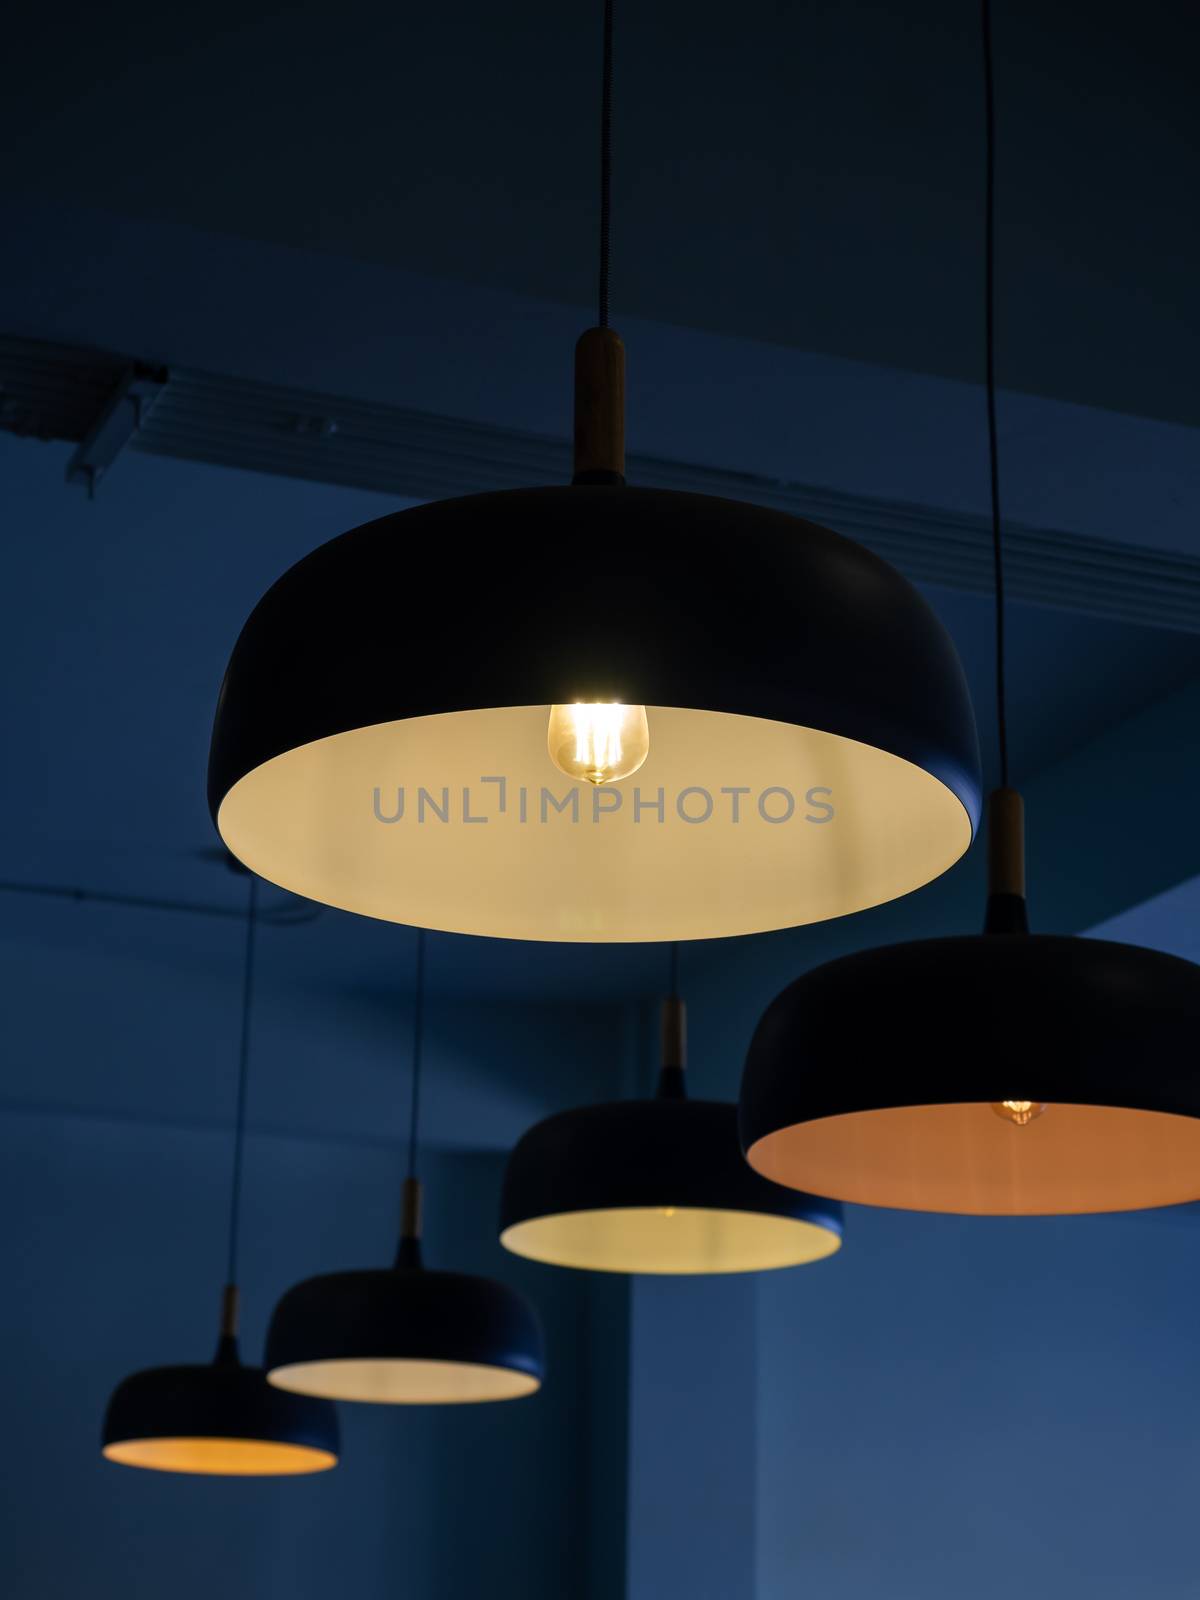 Beautiful round modern ceiling lamps with light bulbs in dark blue room background vertical style.